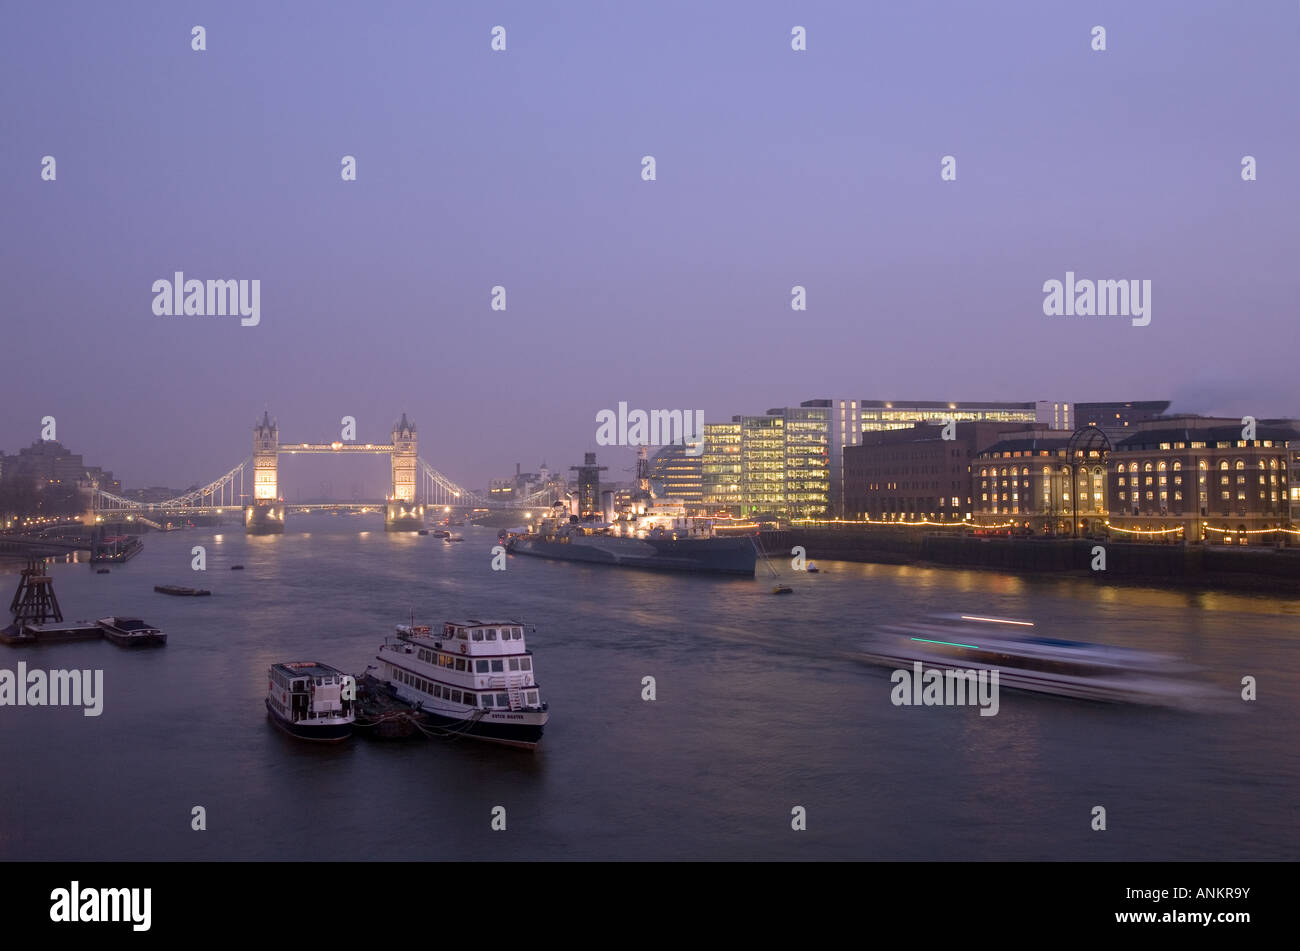 London, England. Boats along the Thames River with Tower Bridge in the background. Stock Photo